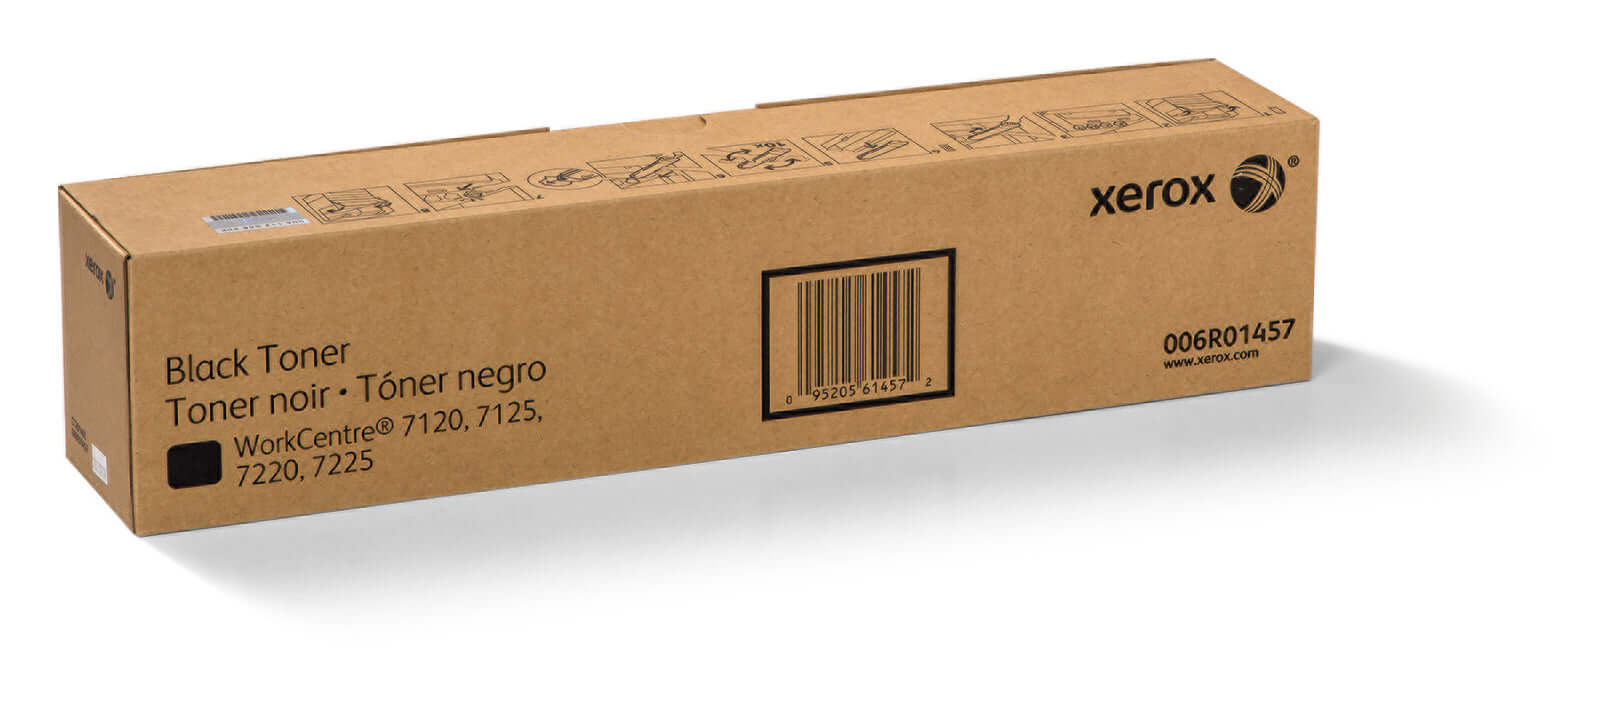 Xerox Black Toner Cartridge Sold (22,000 Pages) 006R01457 for WorkCentre 7120/7125/7220/7225/7220i/7225i